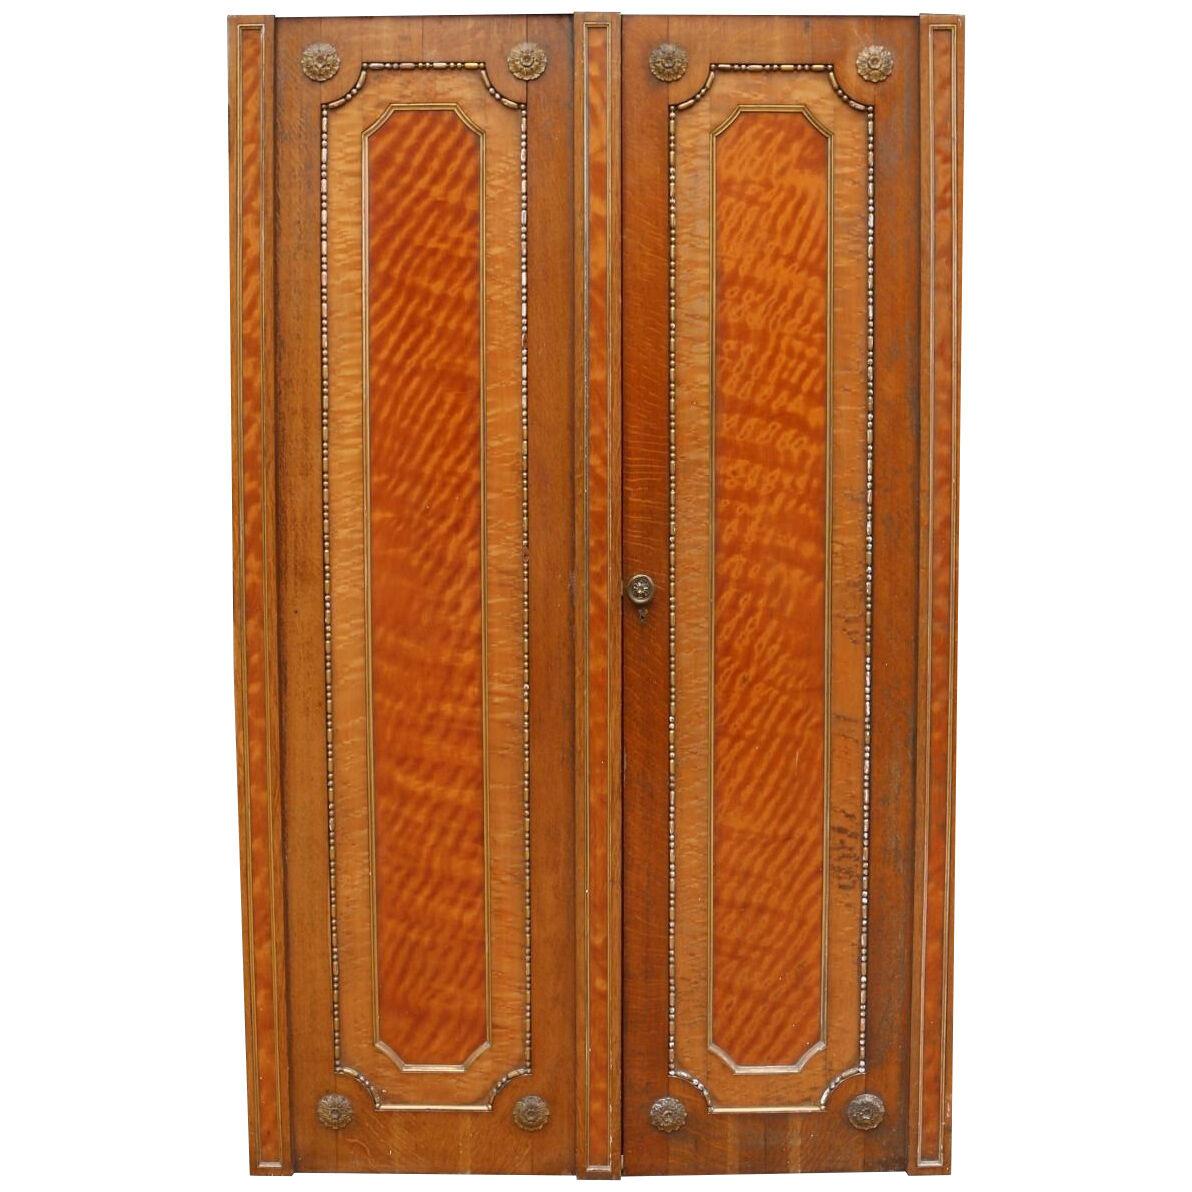 A Set of Fine Quality Oak and Maple Double Doors